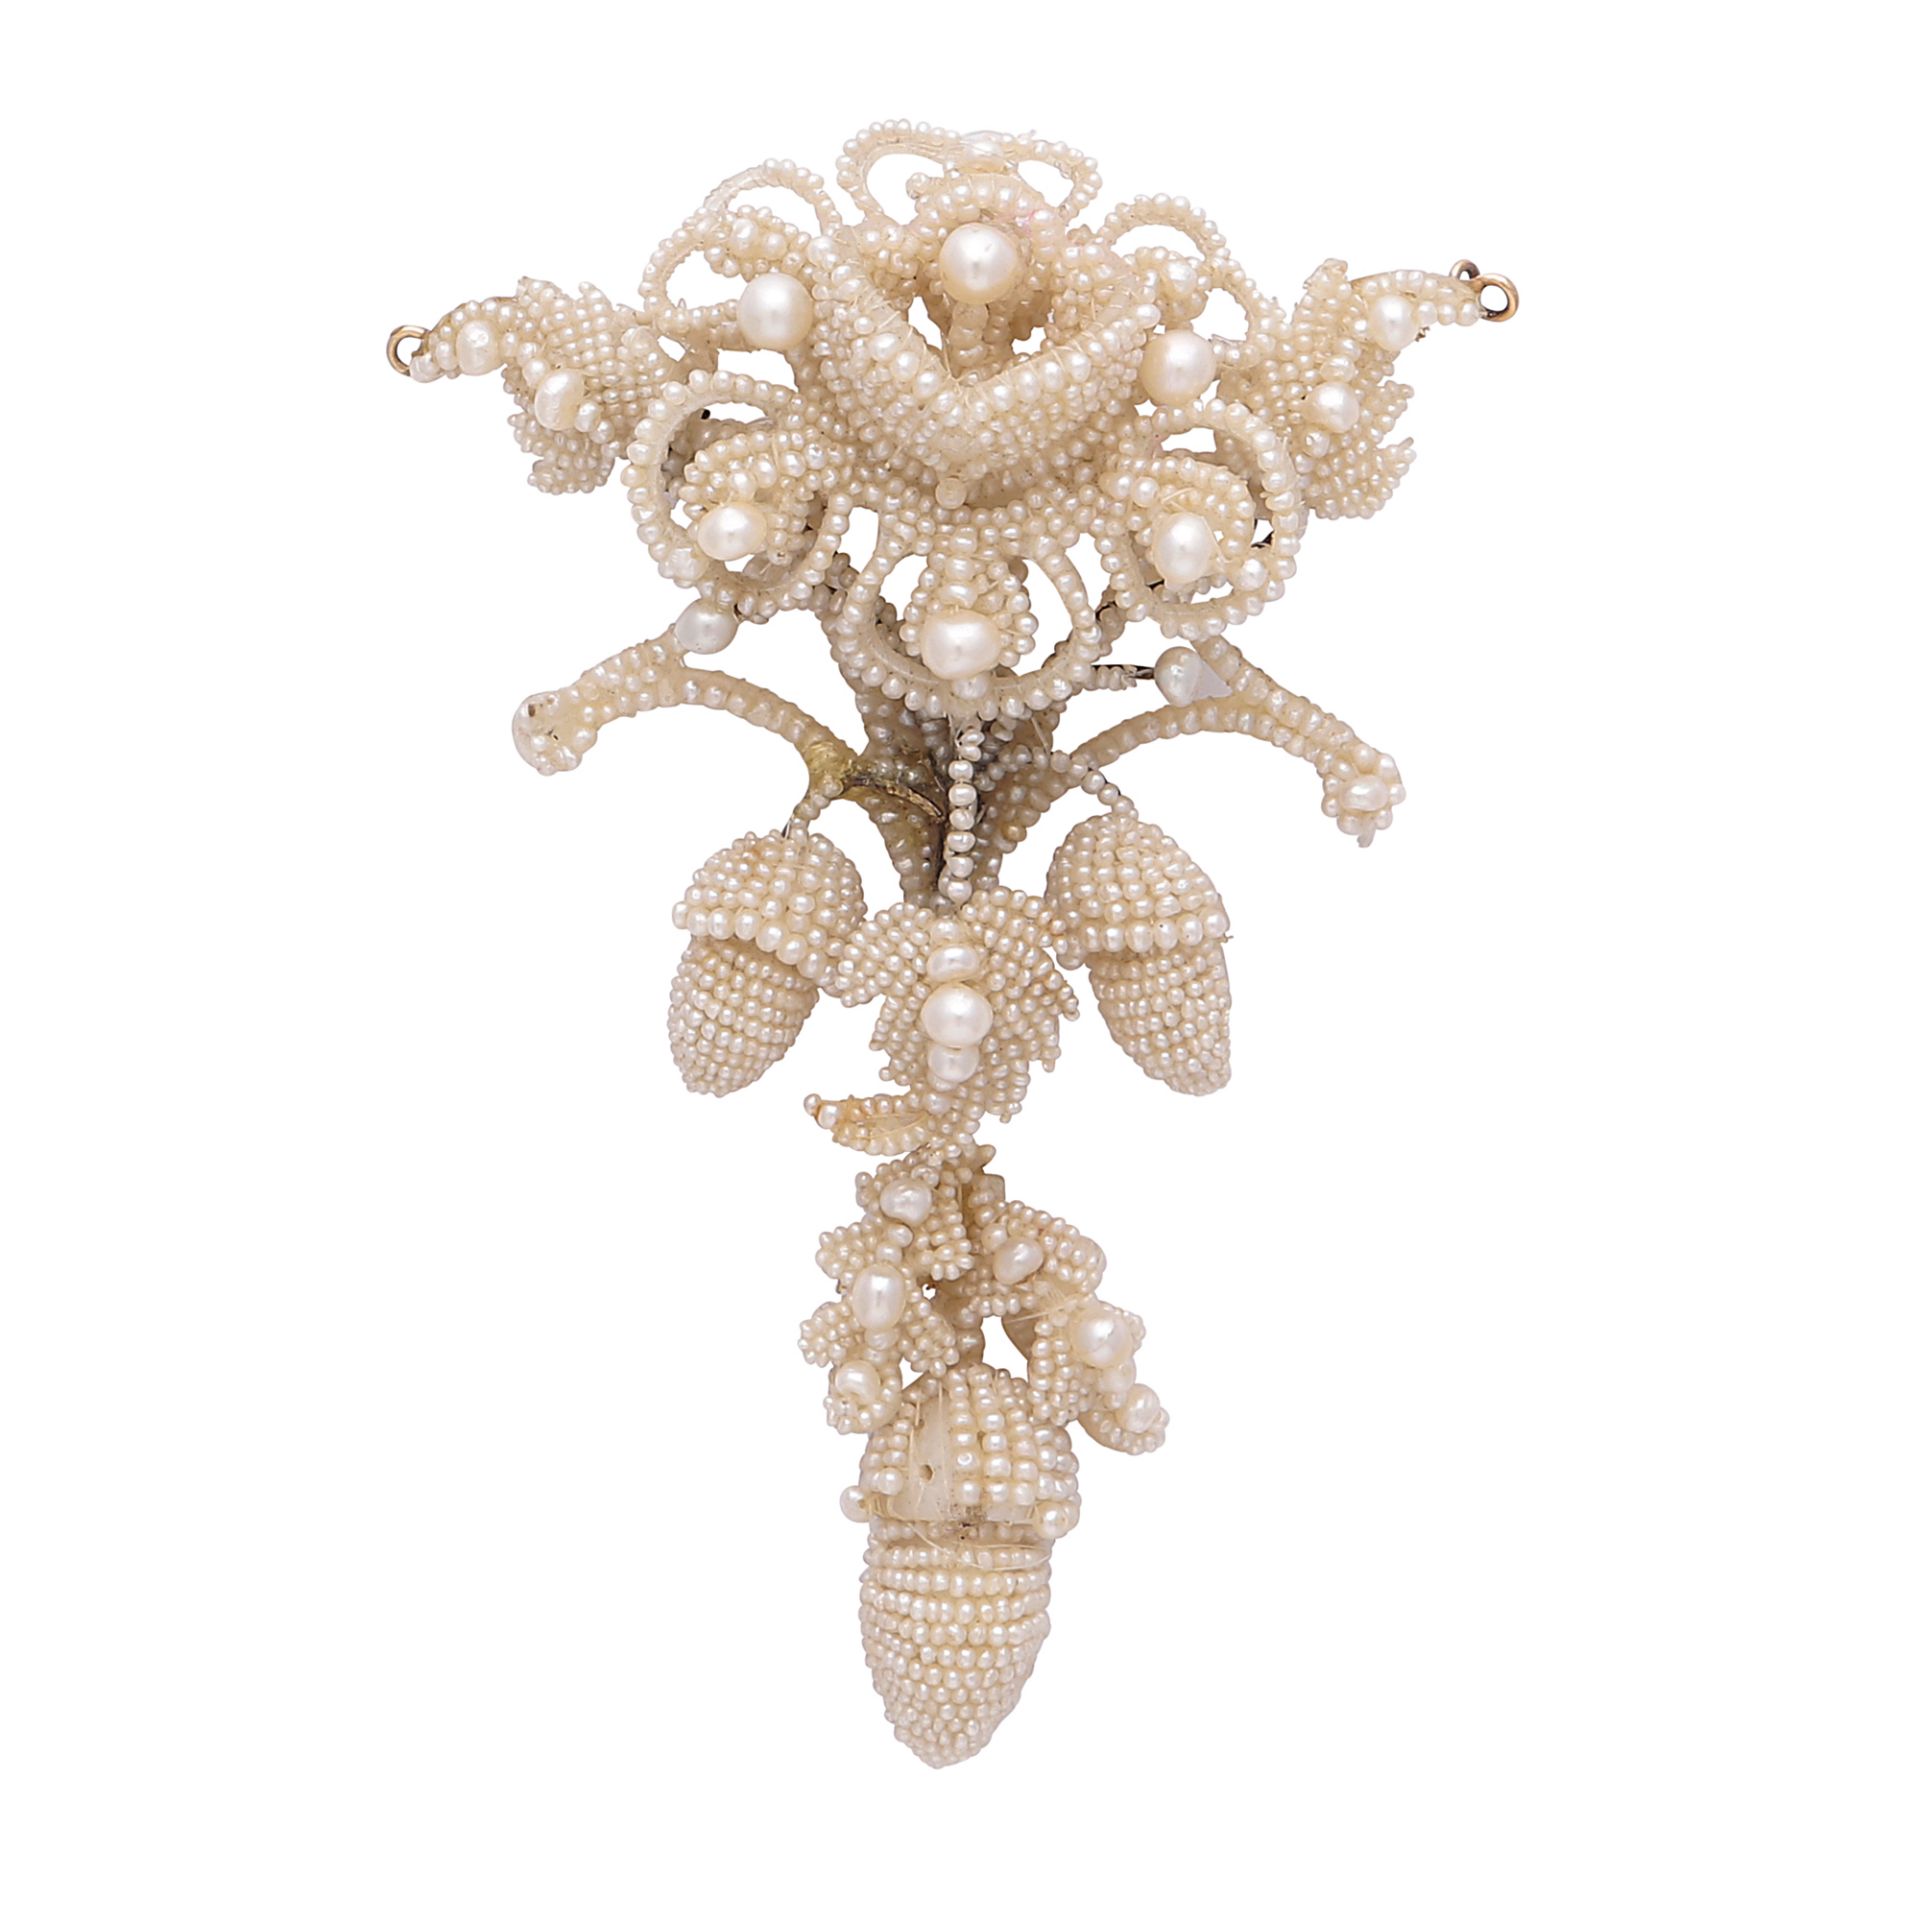 An antique Georgian seed pearl necklace / brooch designed as an array of floral motifs featuring